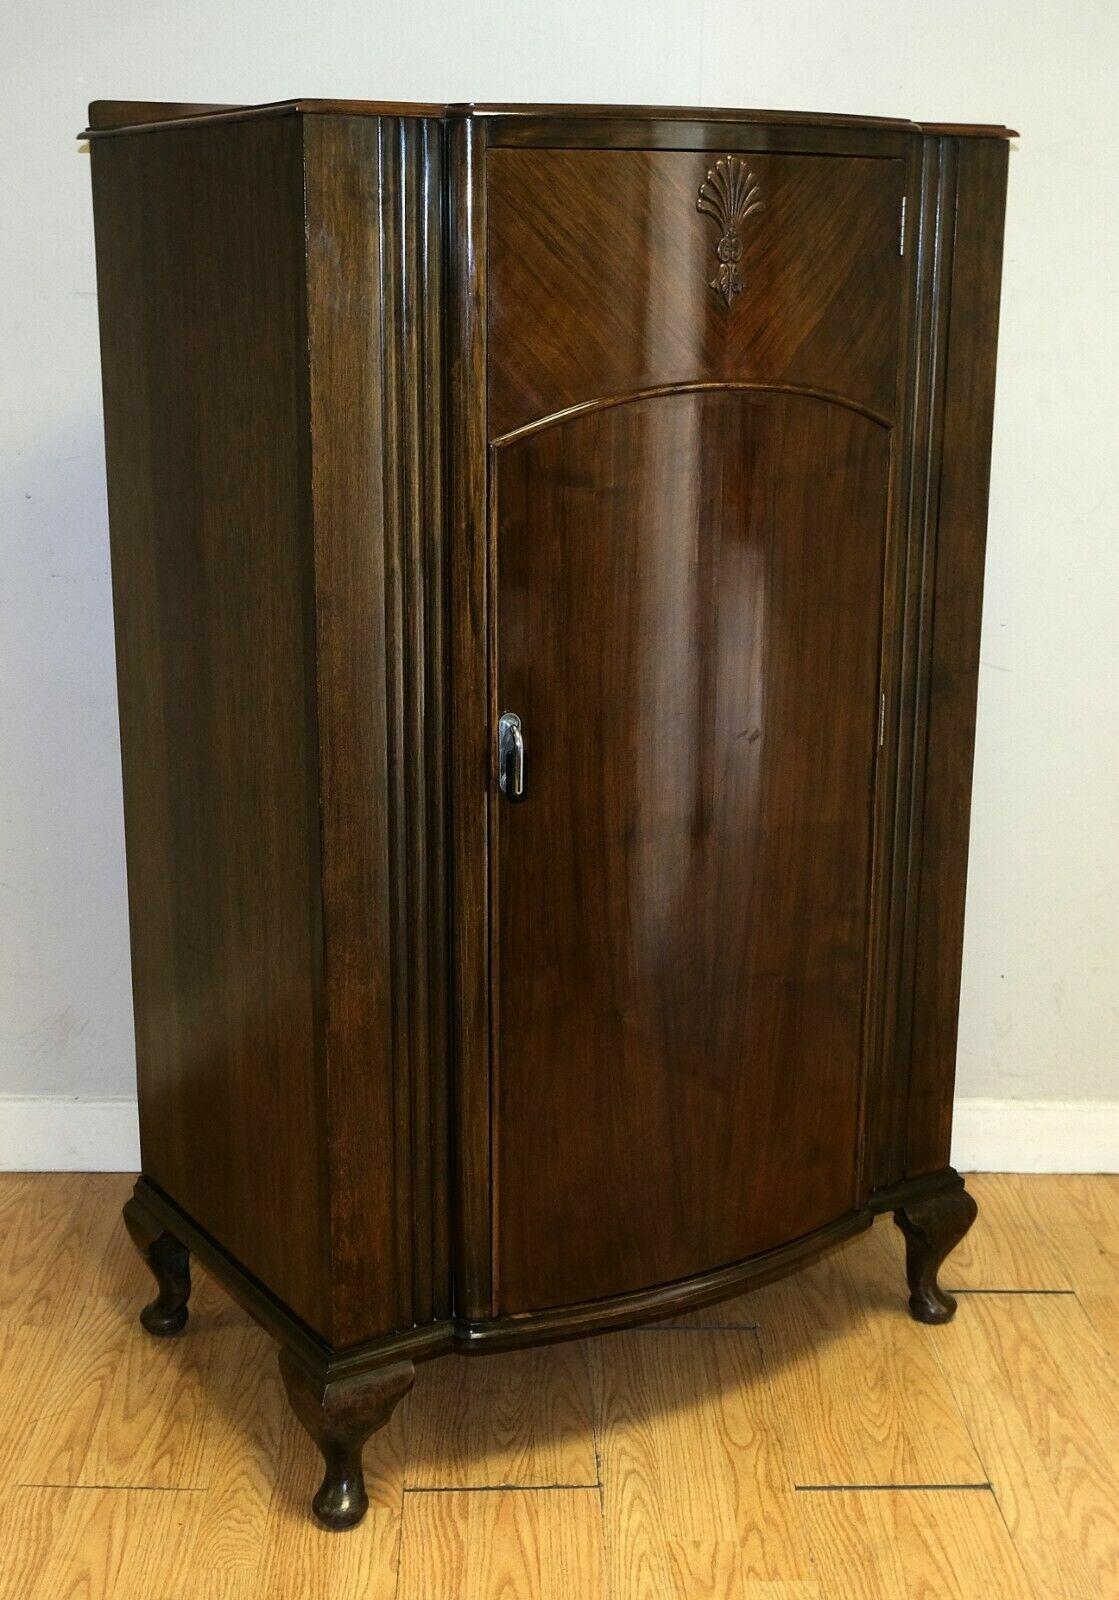 We are delighted to offer for sale this elegant C.W.S Cabinet Works Birmingham walnut ladies wardrobe on cabriole legs.

This piece is a part of a suite, with a dressing table, a bed and a double wardrobe, however, this sale is just for the